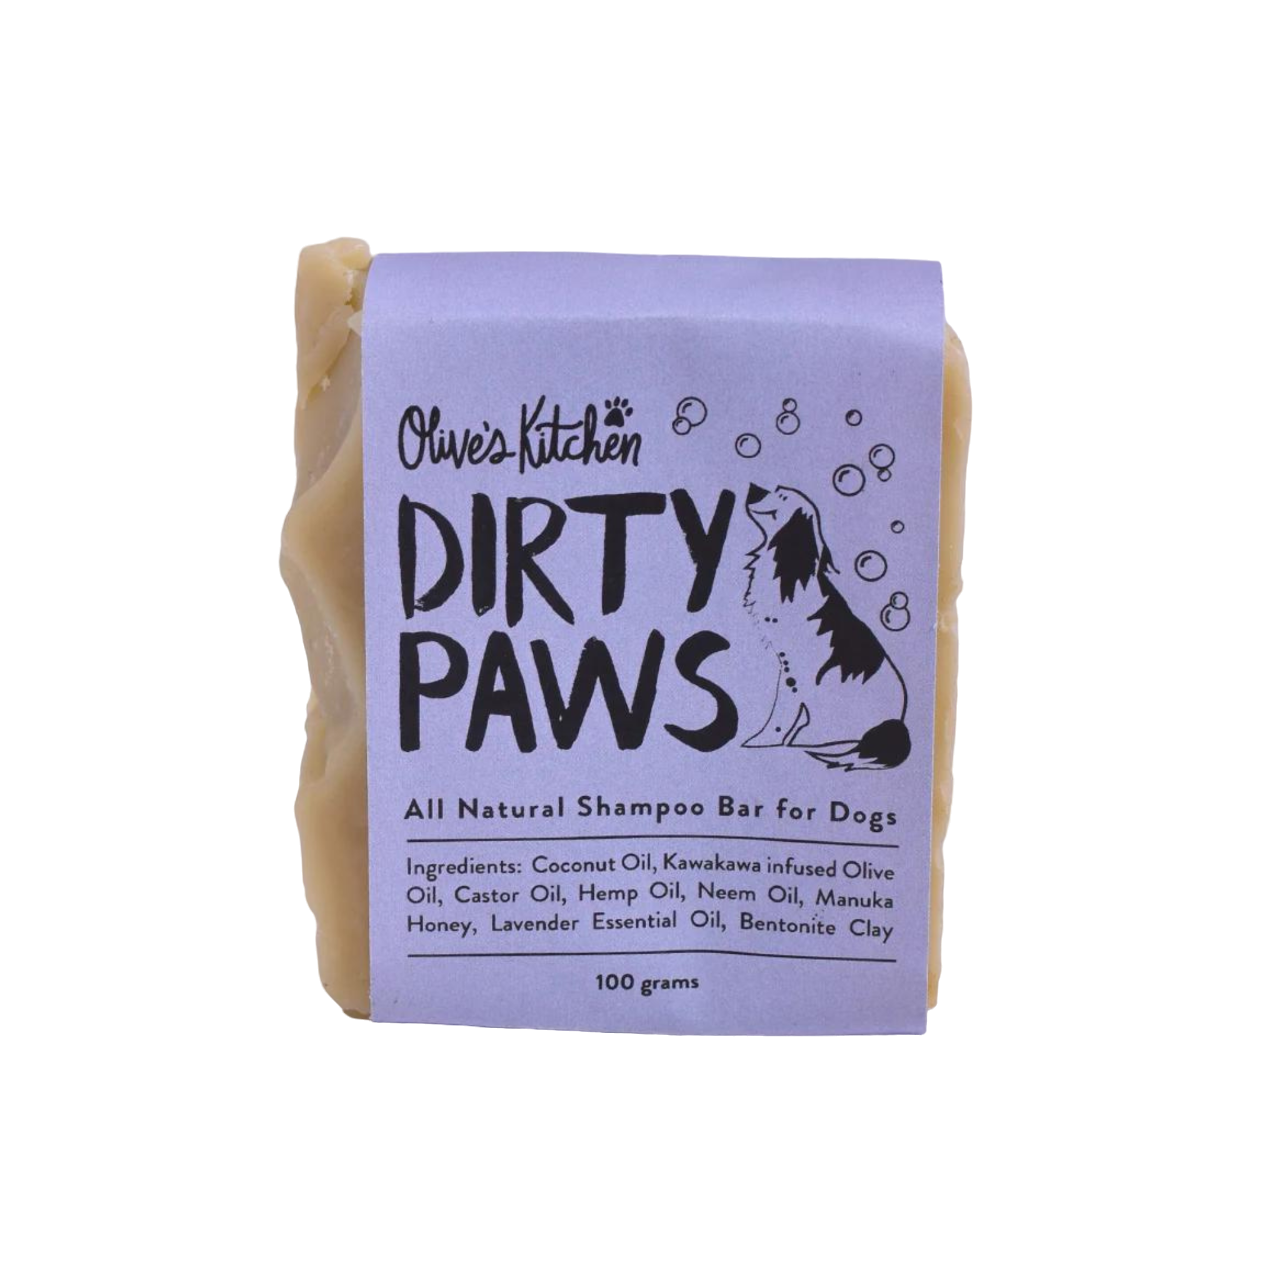 For Dogs - All Natural Shampoo Bar 100g